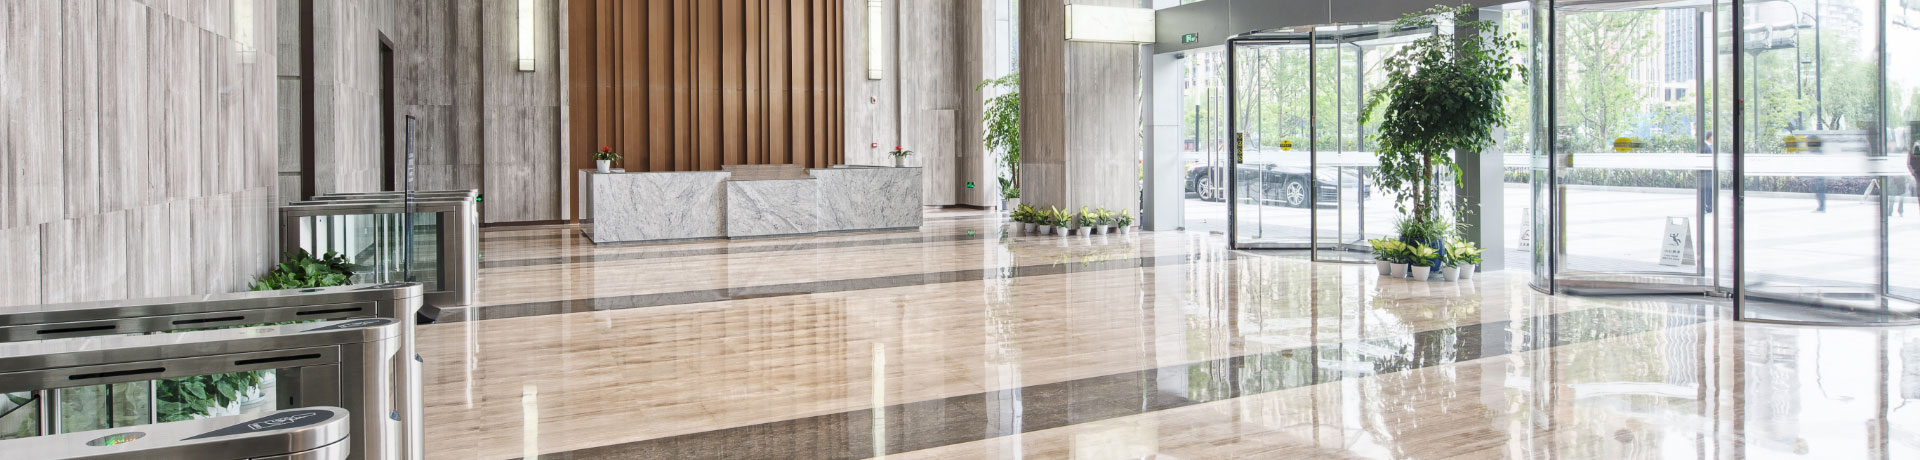 An large office building foyer with freshly cleaned floors and wiped down glass walls